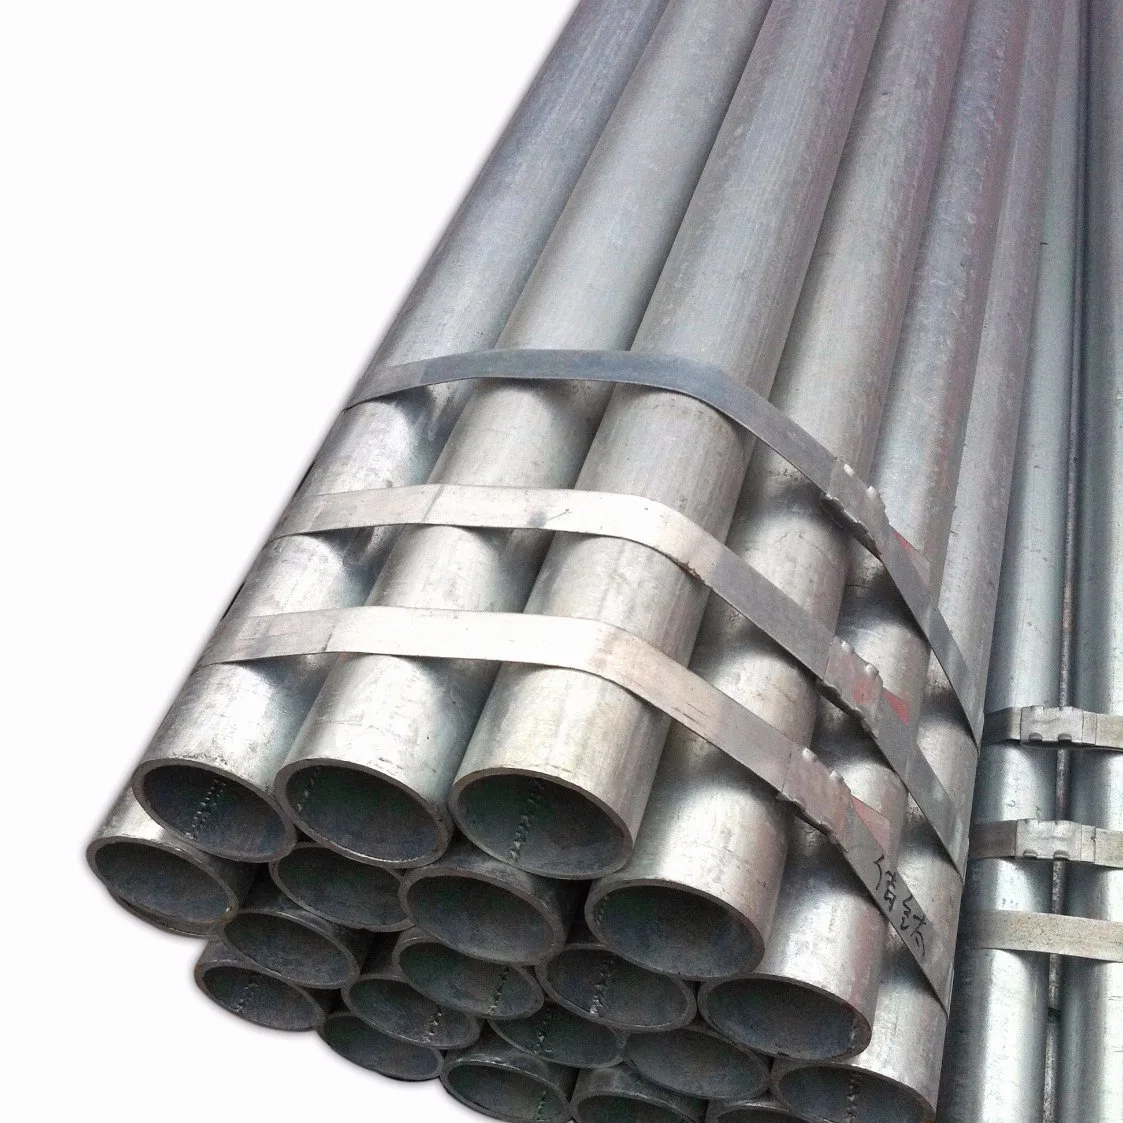 AISI Standard 304 316 Cold Rolled Seamless Stainless Steel Pipe